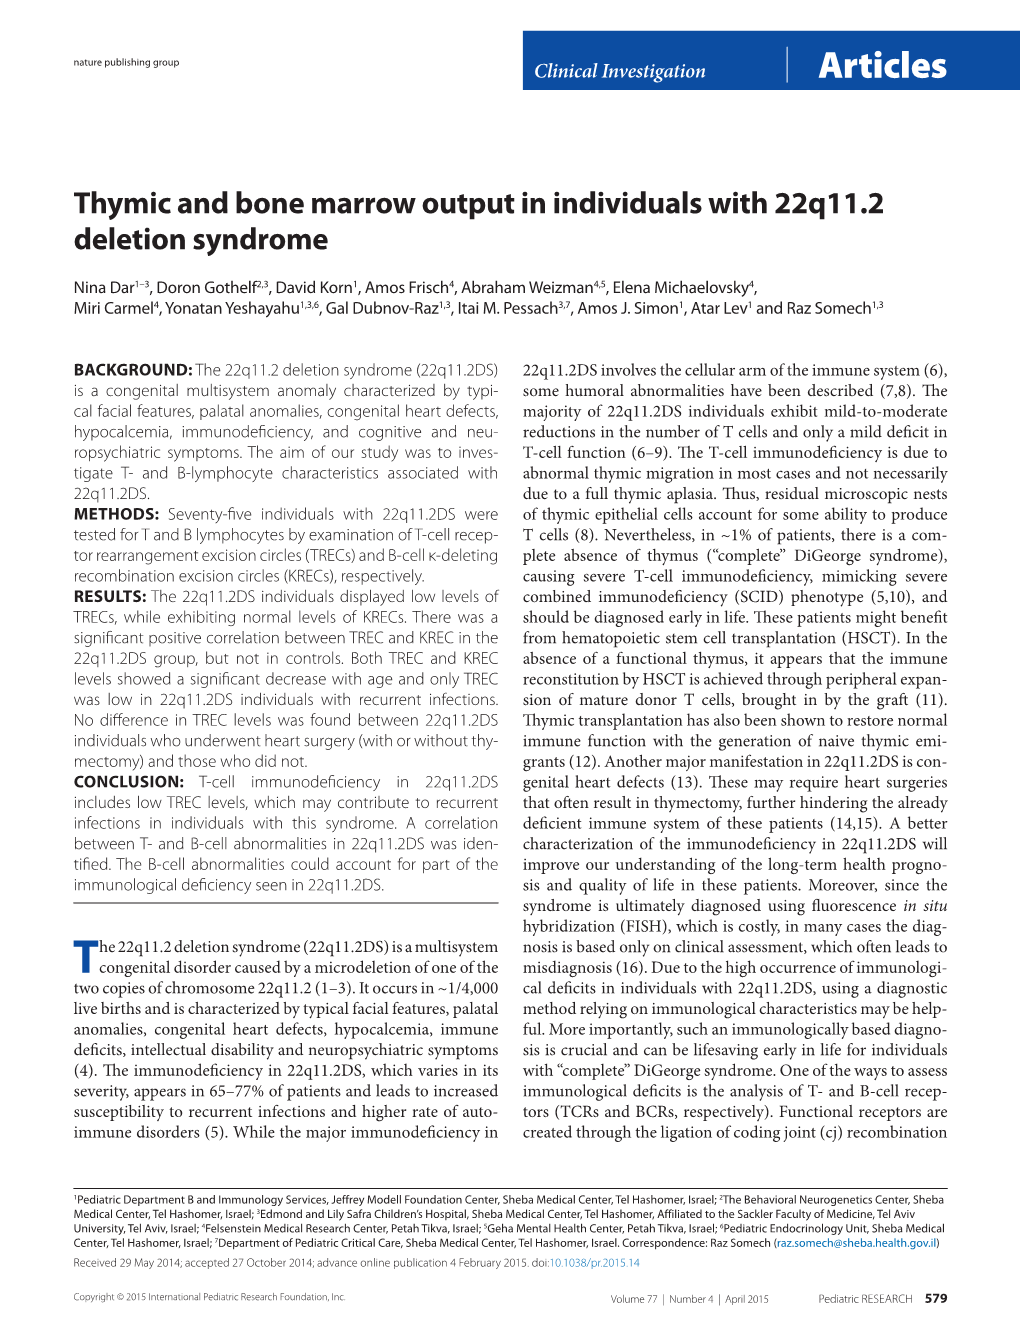 Thymic and Bone Marrow Output in Individuals with 22Q11.2 Deletion Syndrome